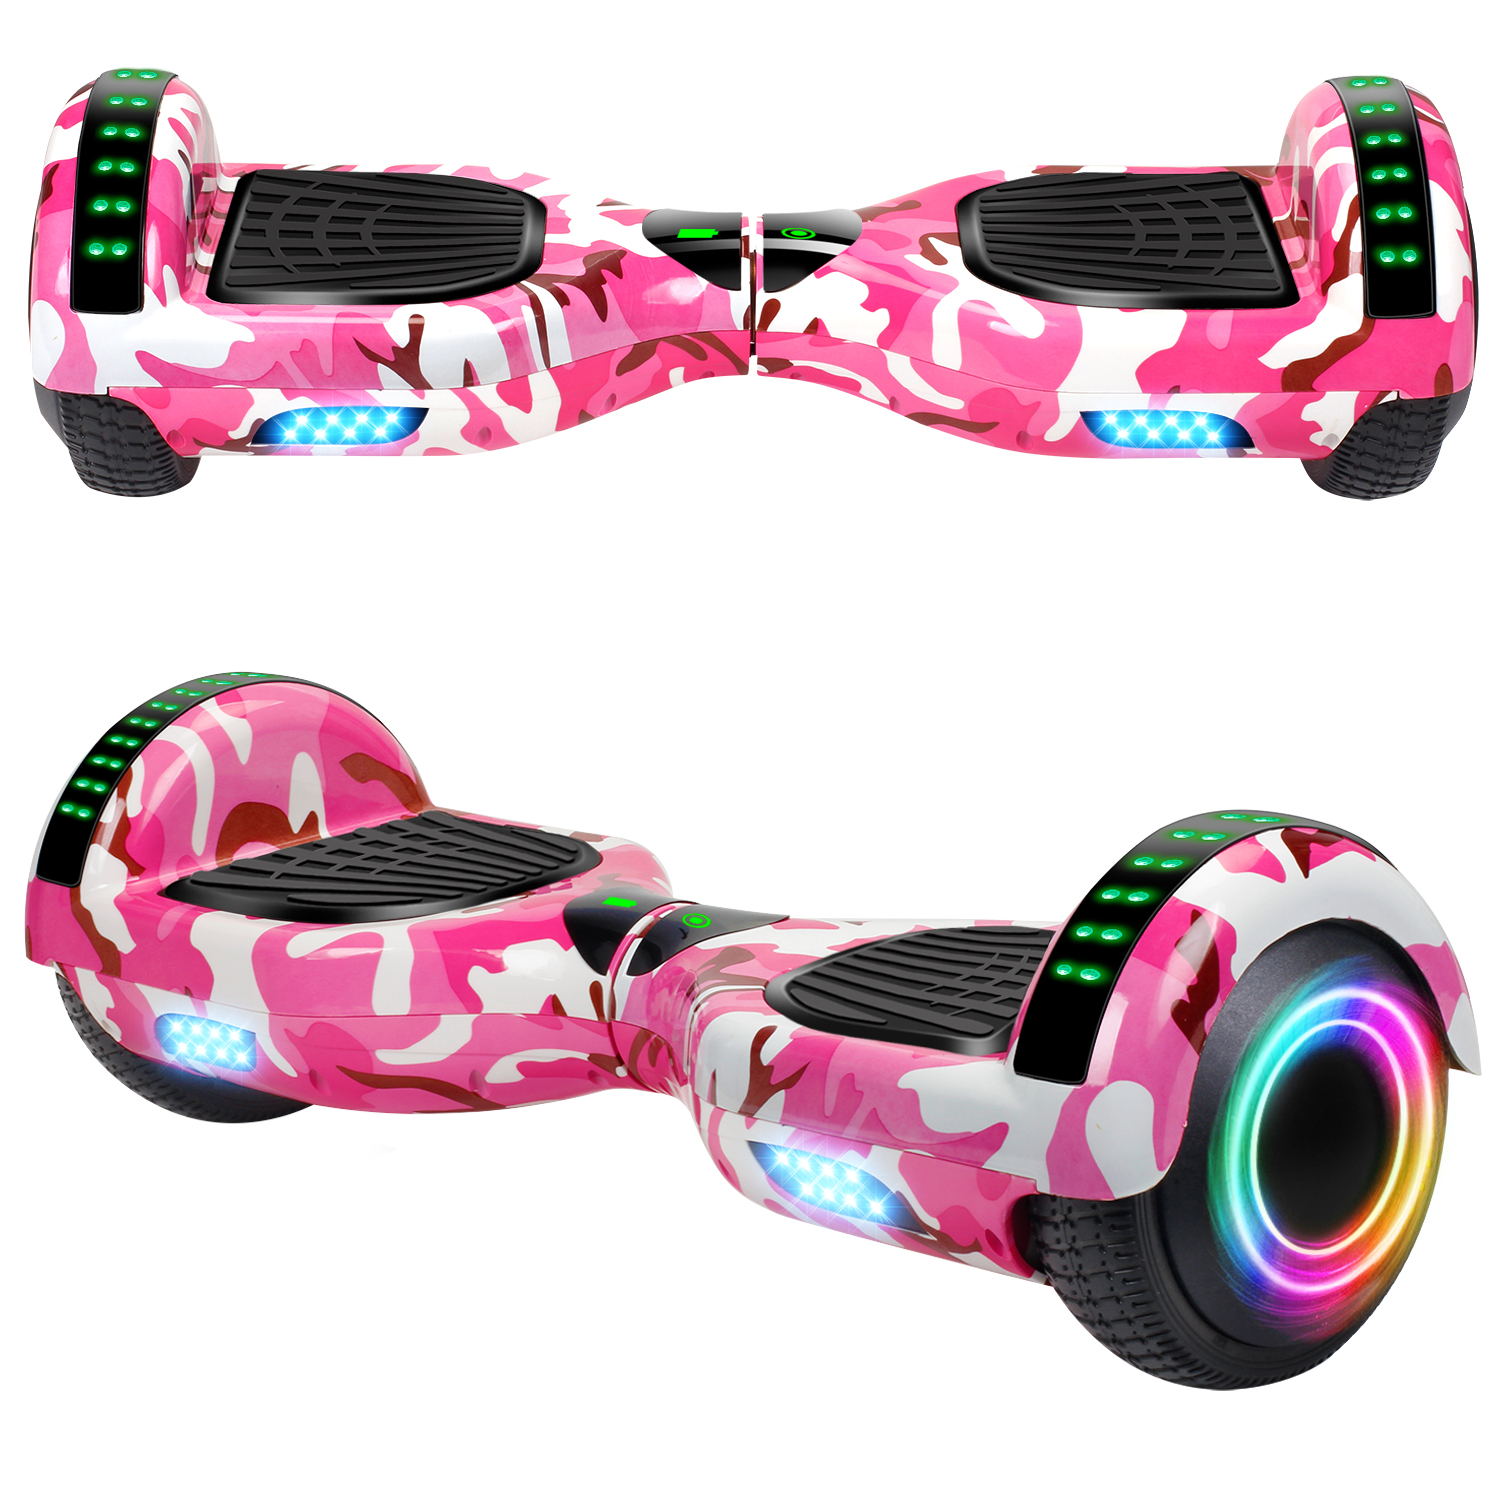 FLYING-ANT Hoverboard Self Balancing Scooters 6.5 Flash Two-Wheel Self Balancing Hoverboard with Bluetooth Speaker and LED Lights for Kids and Adults Gift 